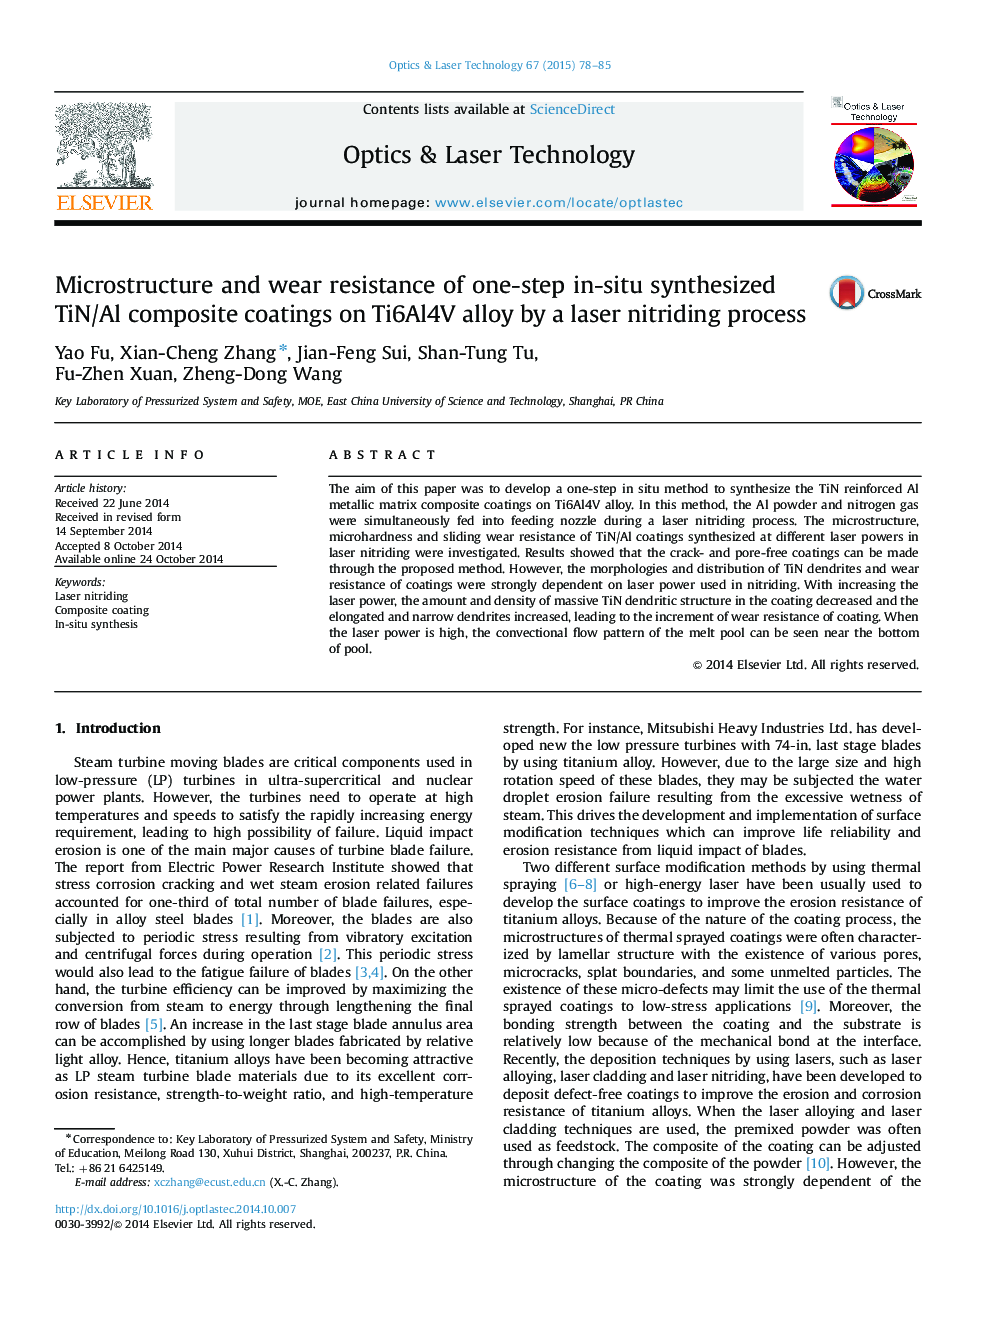 Microstructure and wear resistance of one-step in-situ synthesized TiN/Al composite coatings on Ti6Al4V alloy by a laser nitriding process